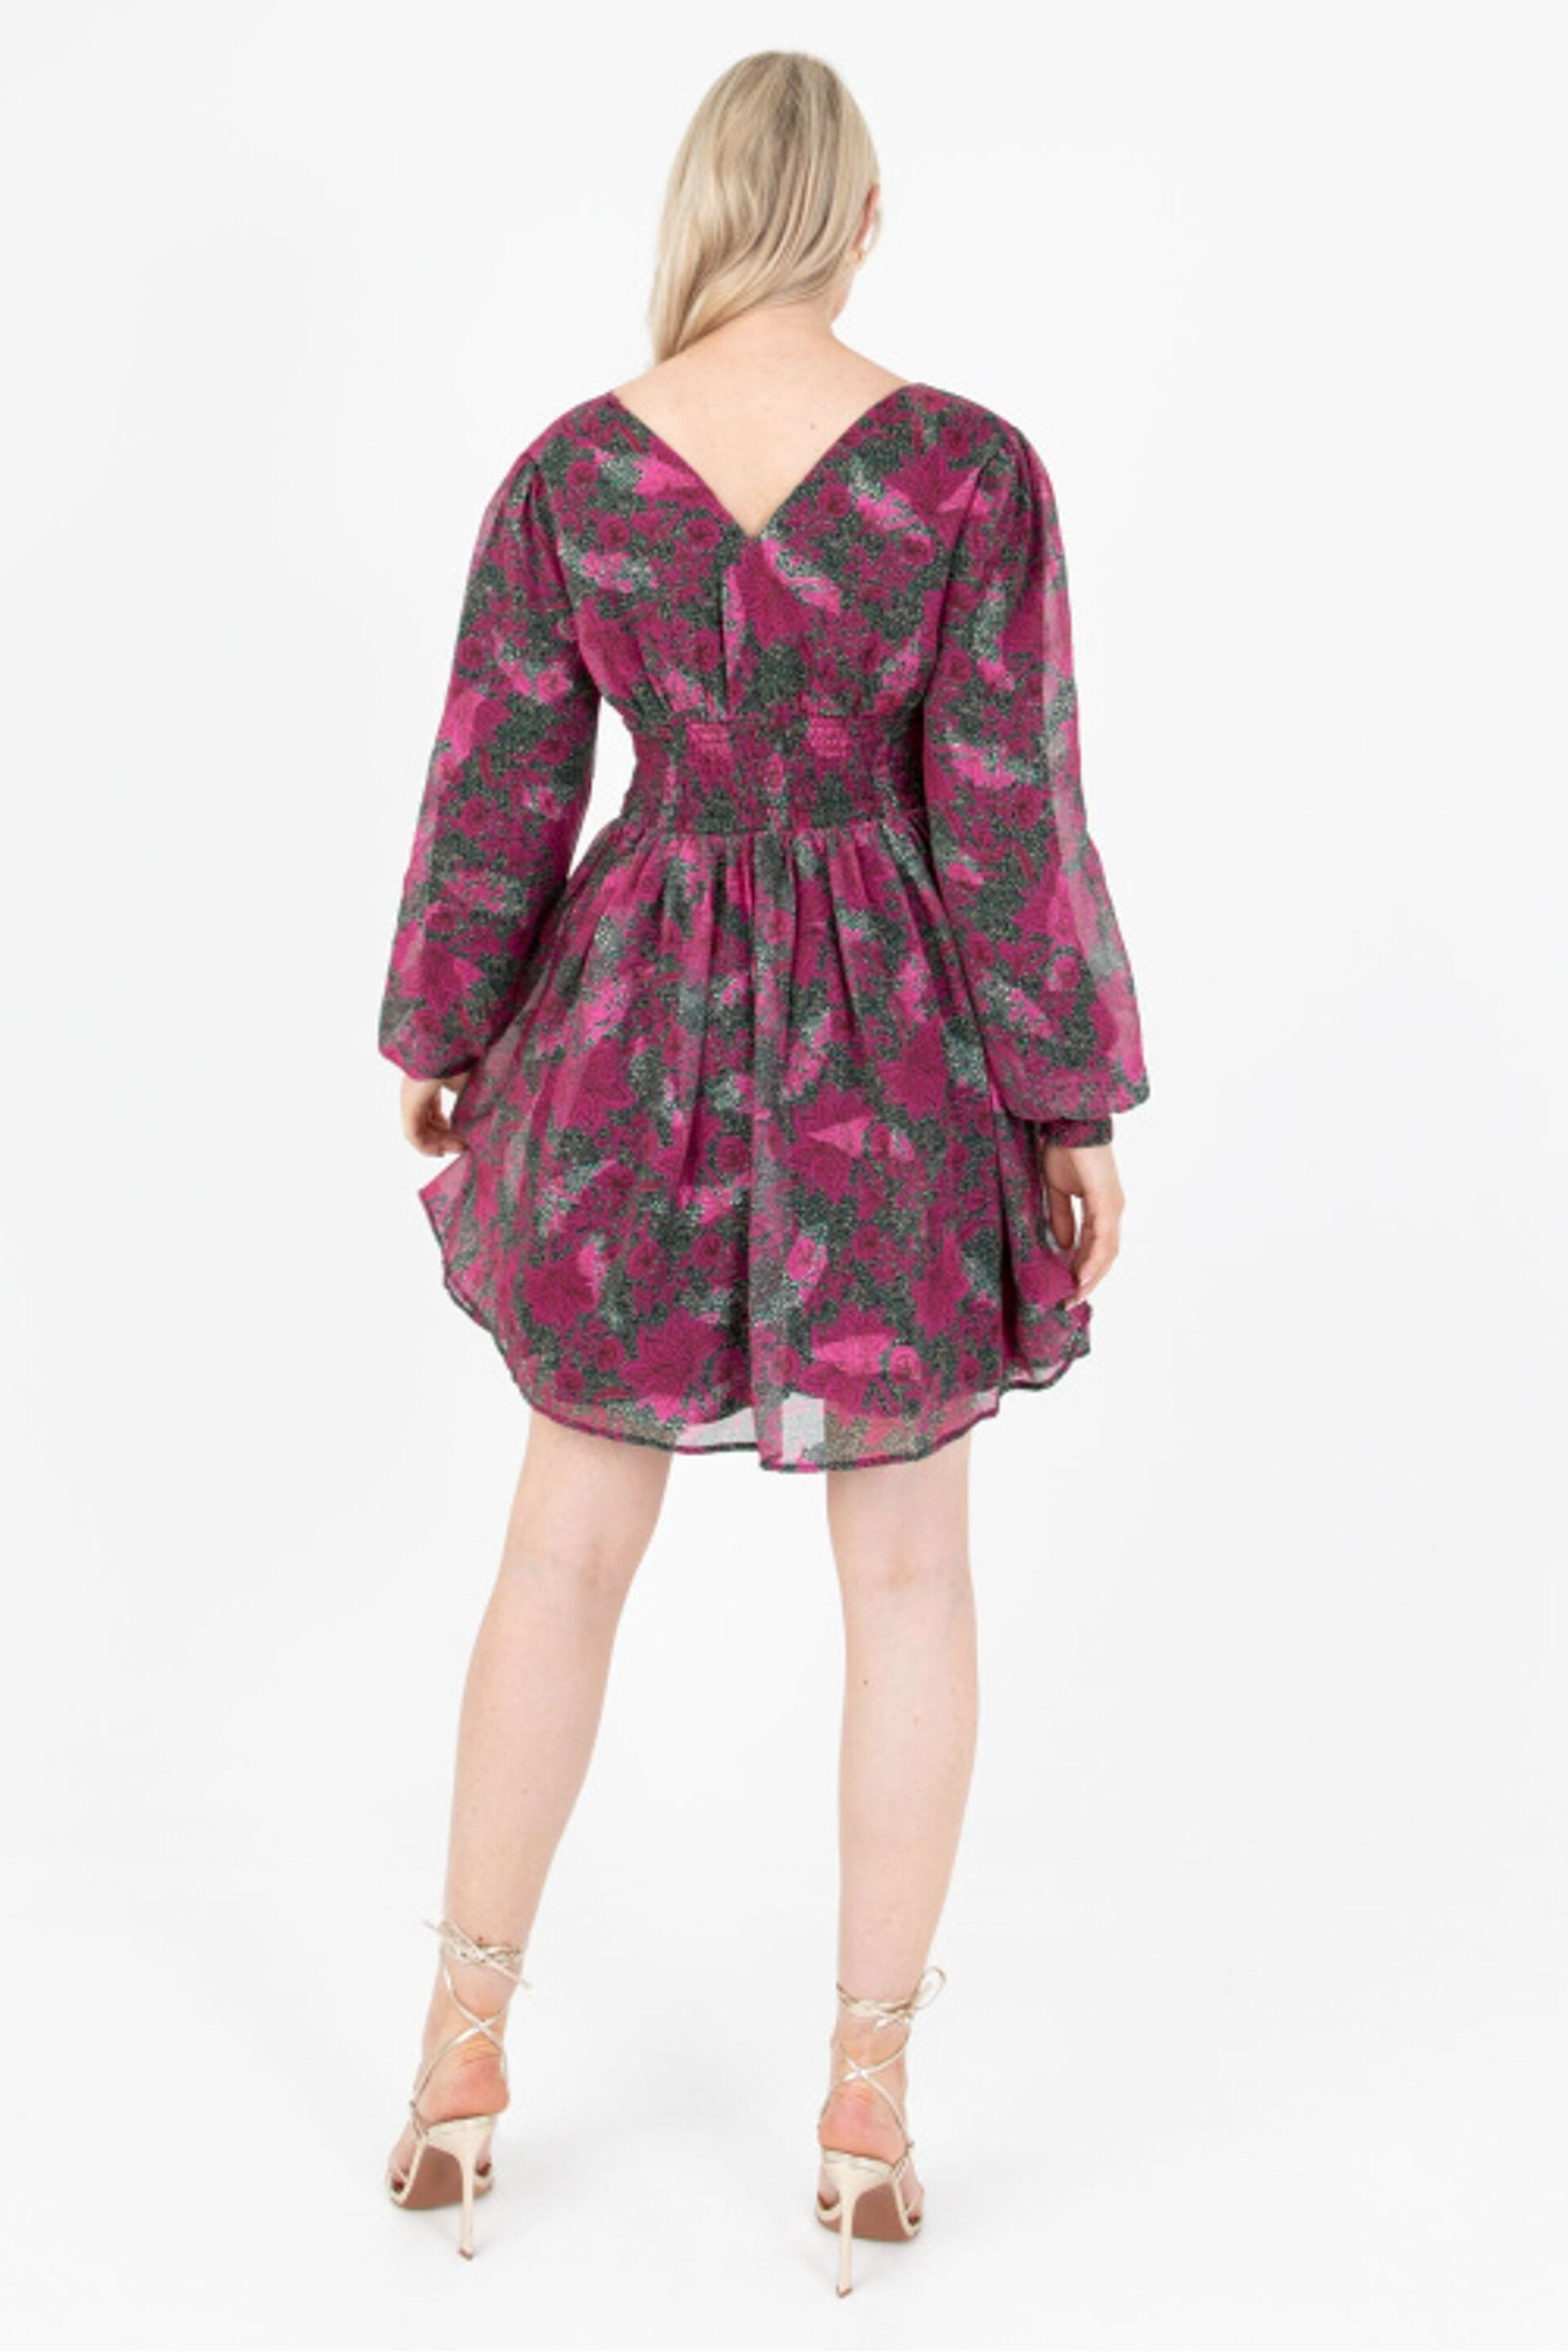 Lovedrobe Pink Printed Button Front Mini Dress - Image 2 of 6